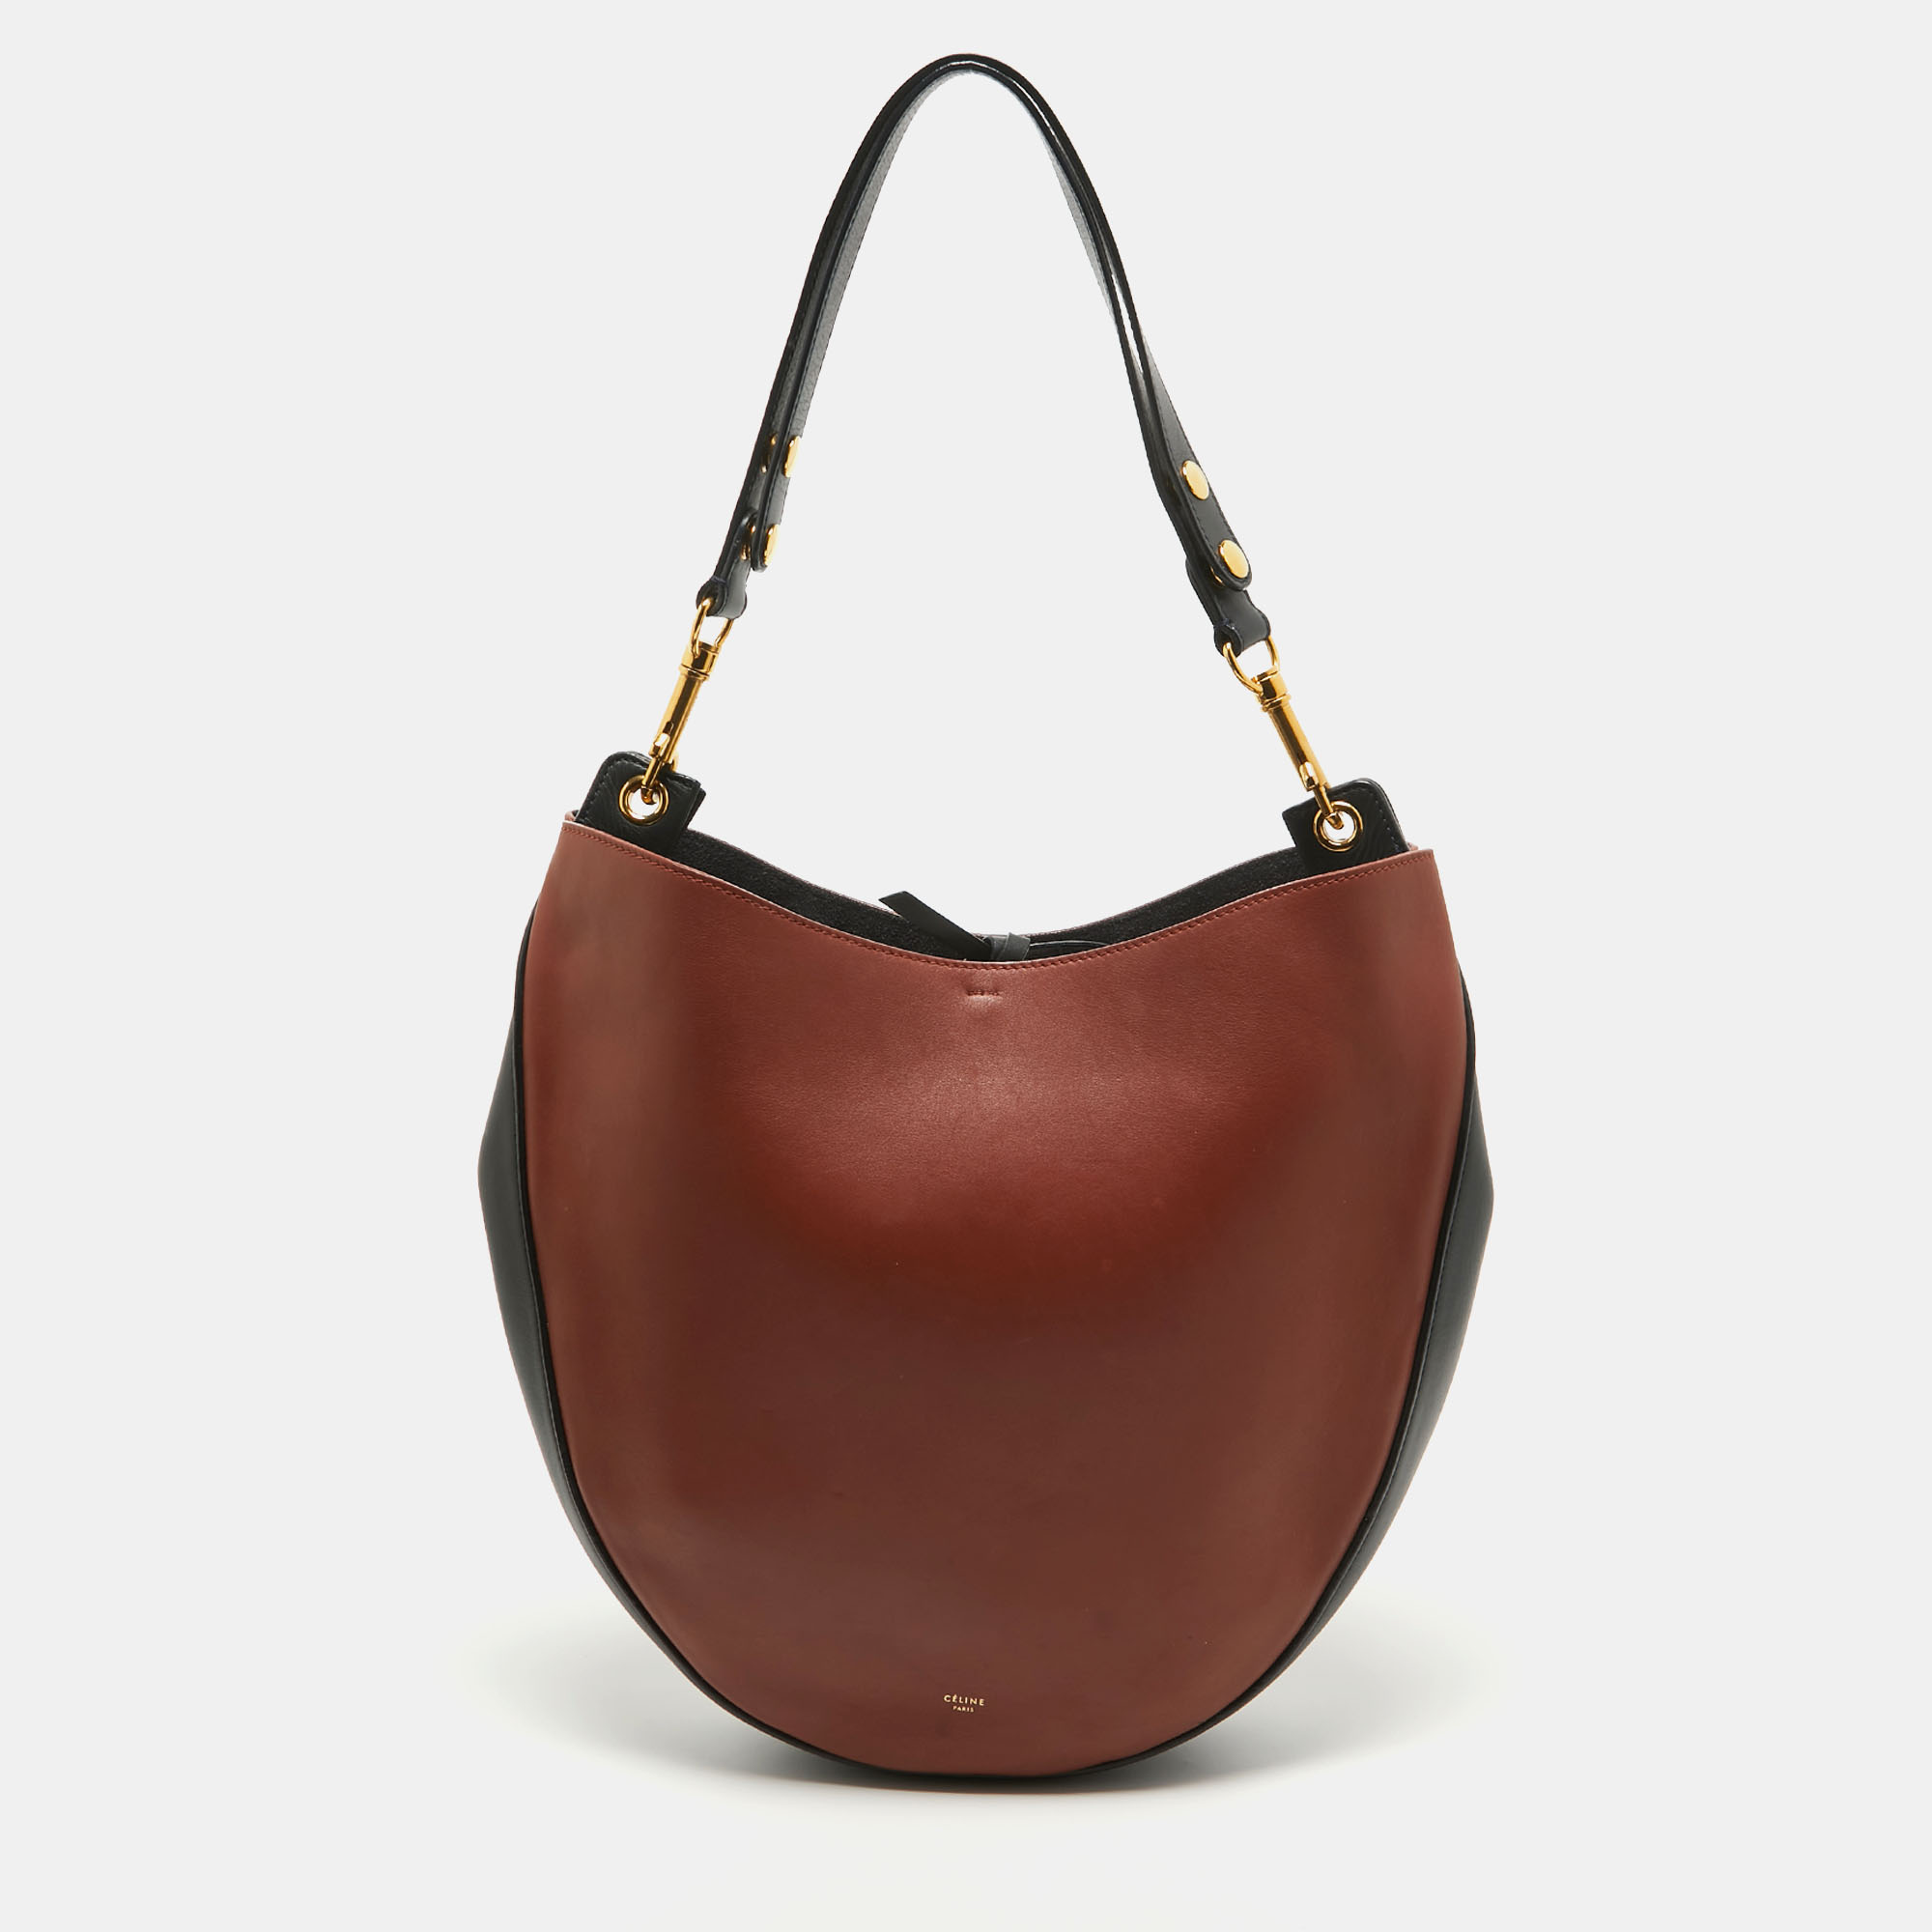 Pre-owned Celine Brown/navy Blue Leather Hobo